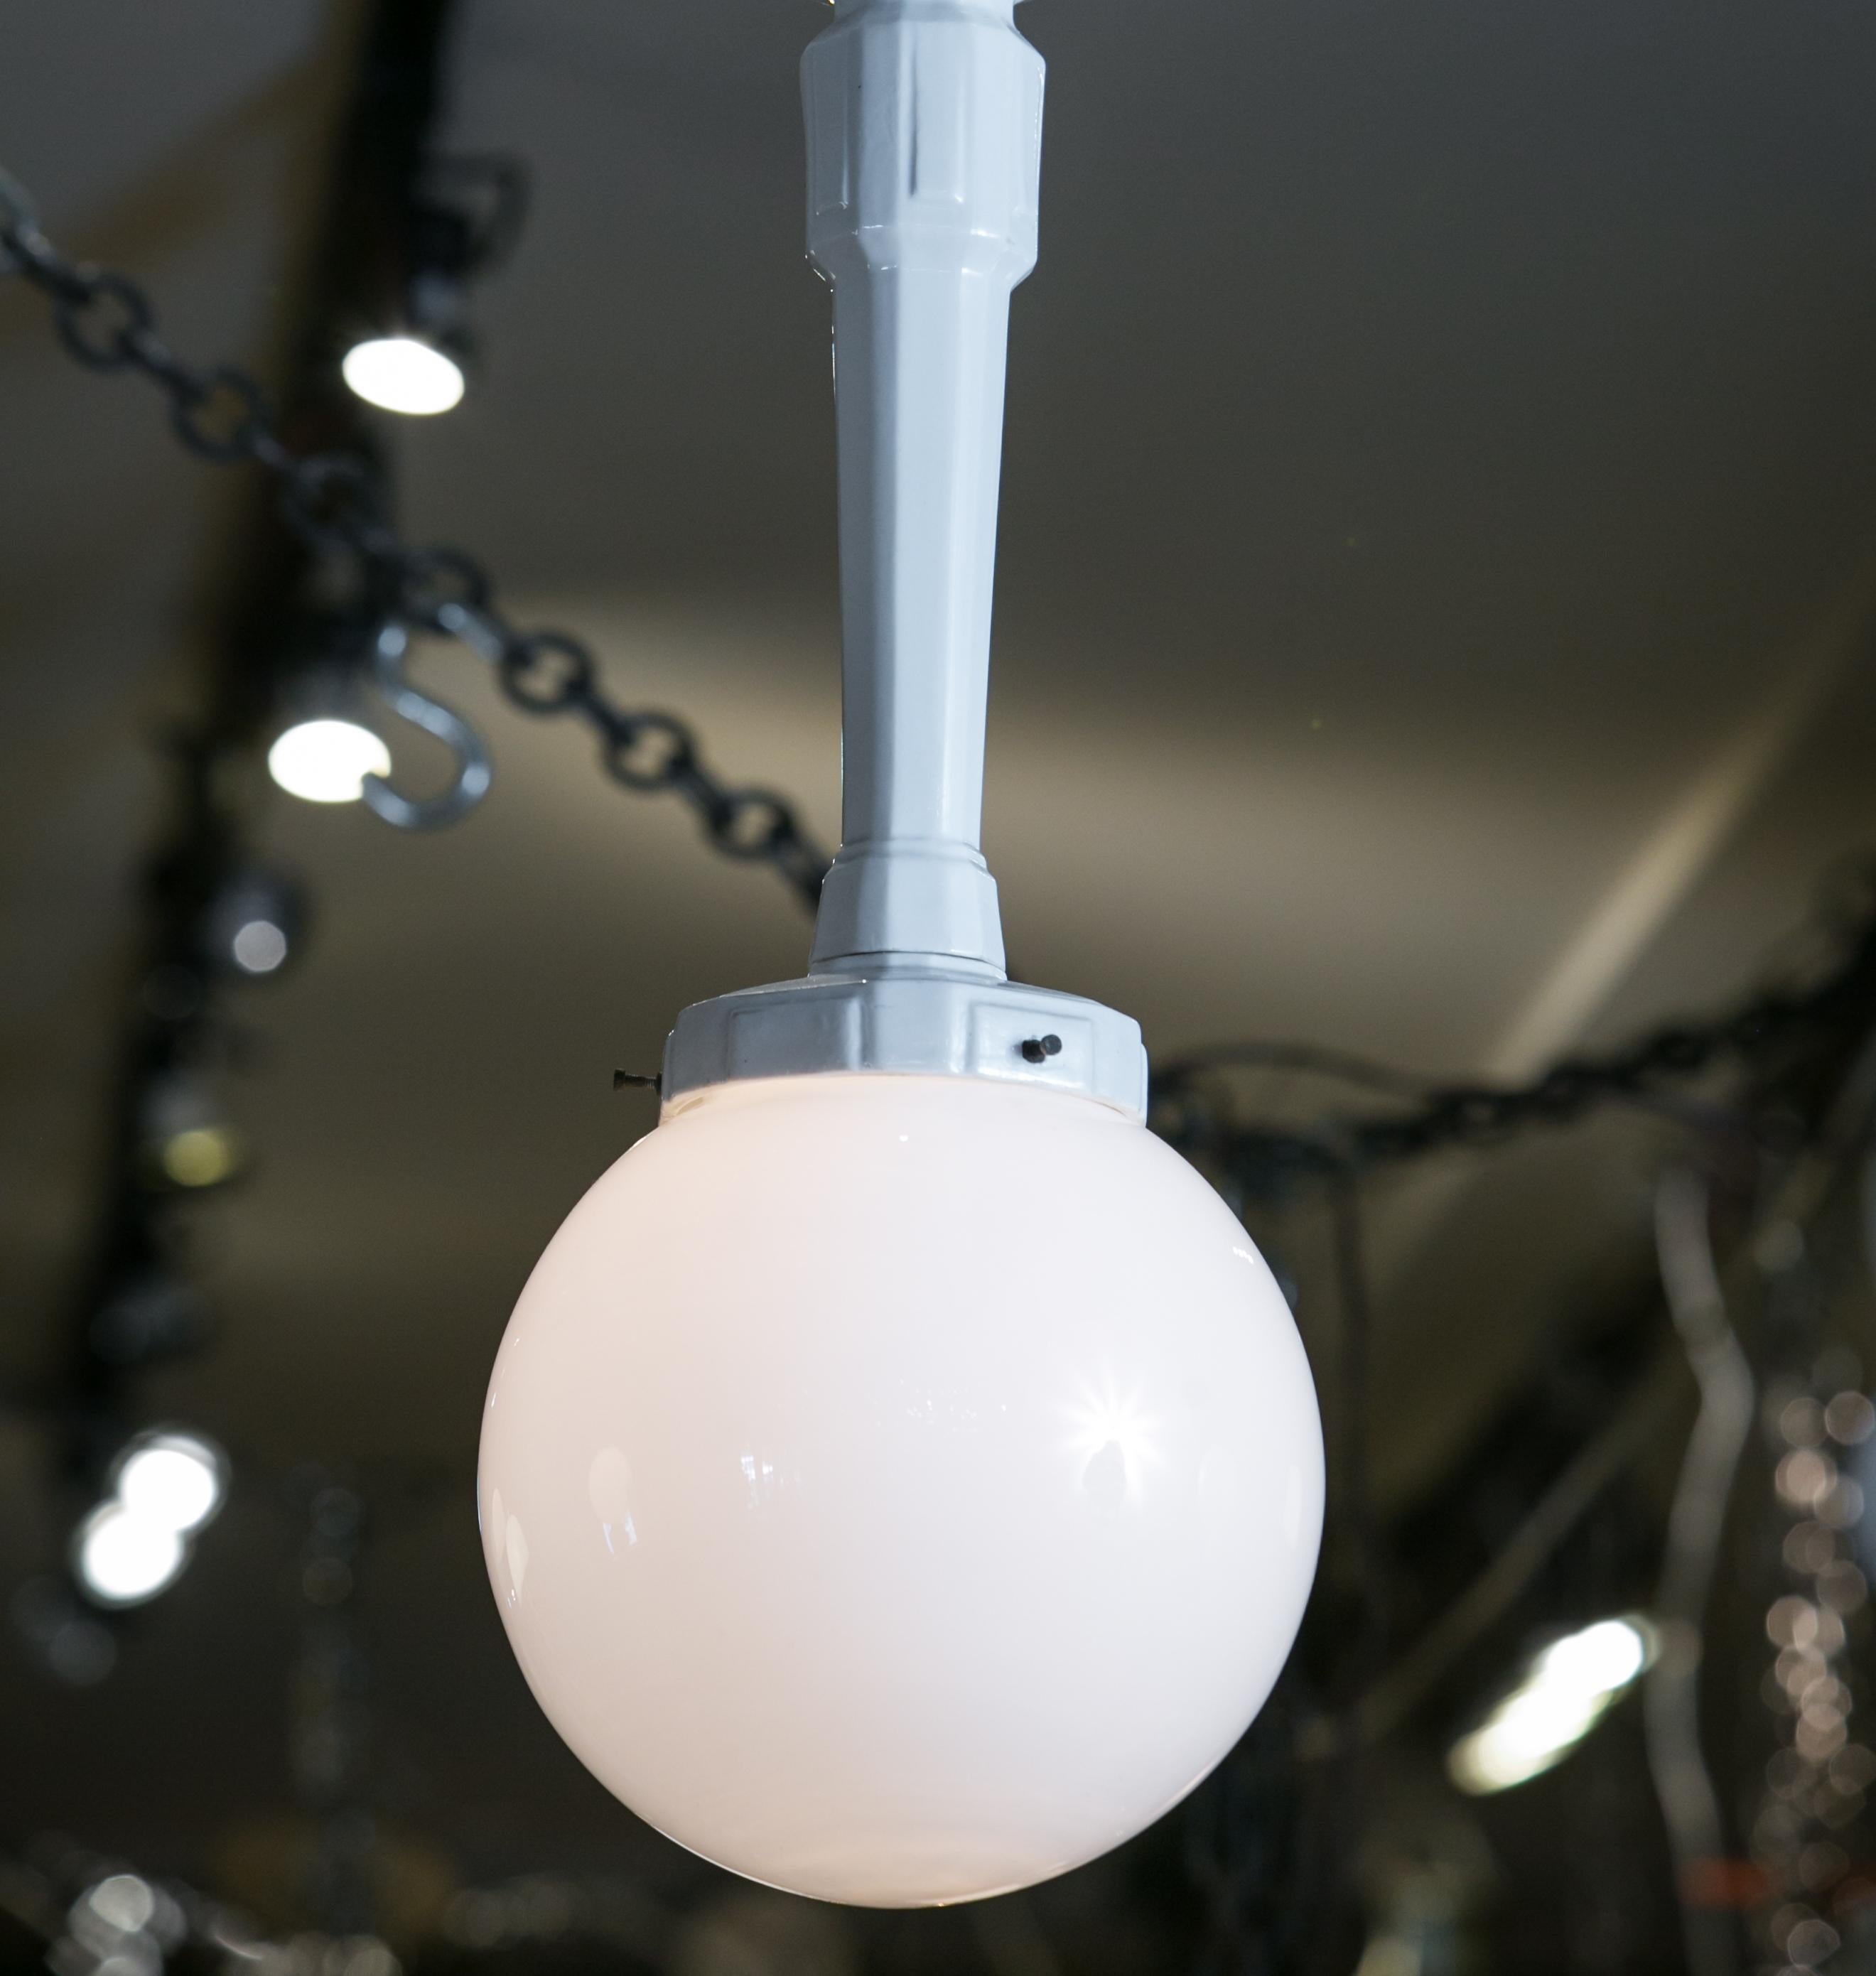 The stem of the pendant is made from cast porcelain and the globe is old milk glass. The pendant has been wired in the USA with a custom canopy so that it is ready to install. I very seldom run across the style of pendant. I think that it would look